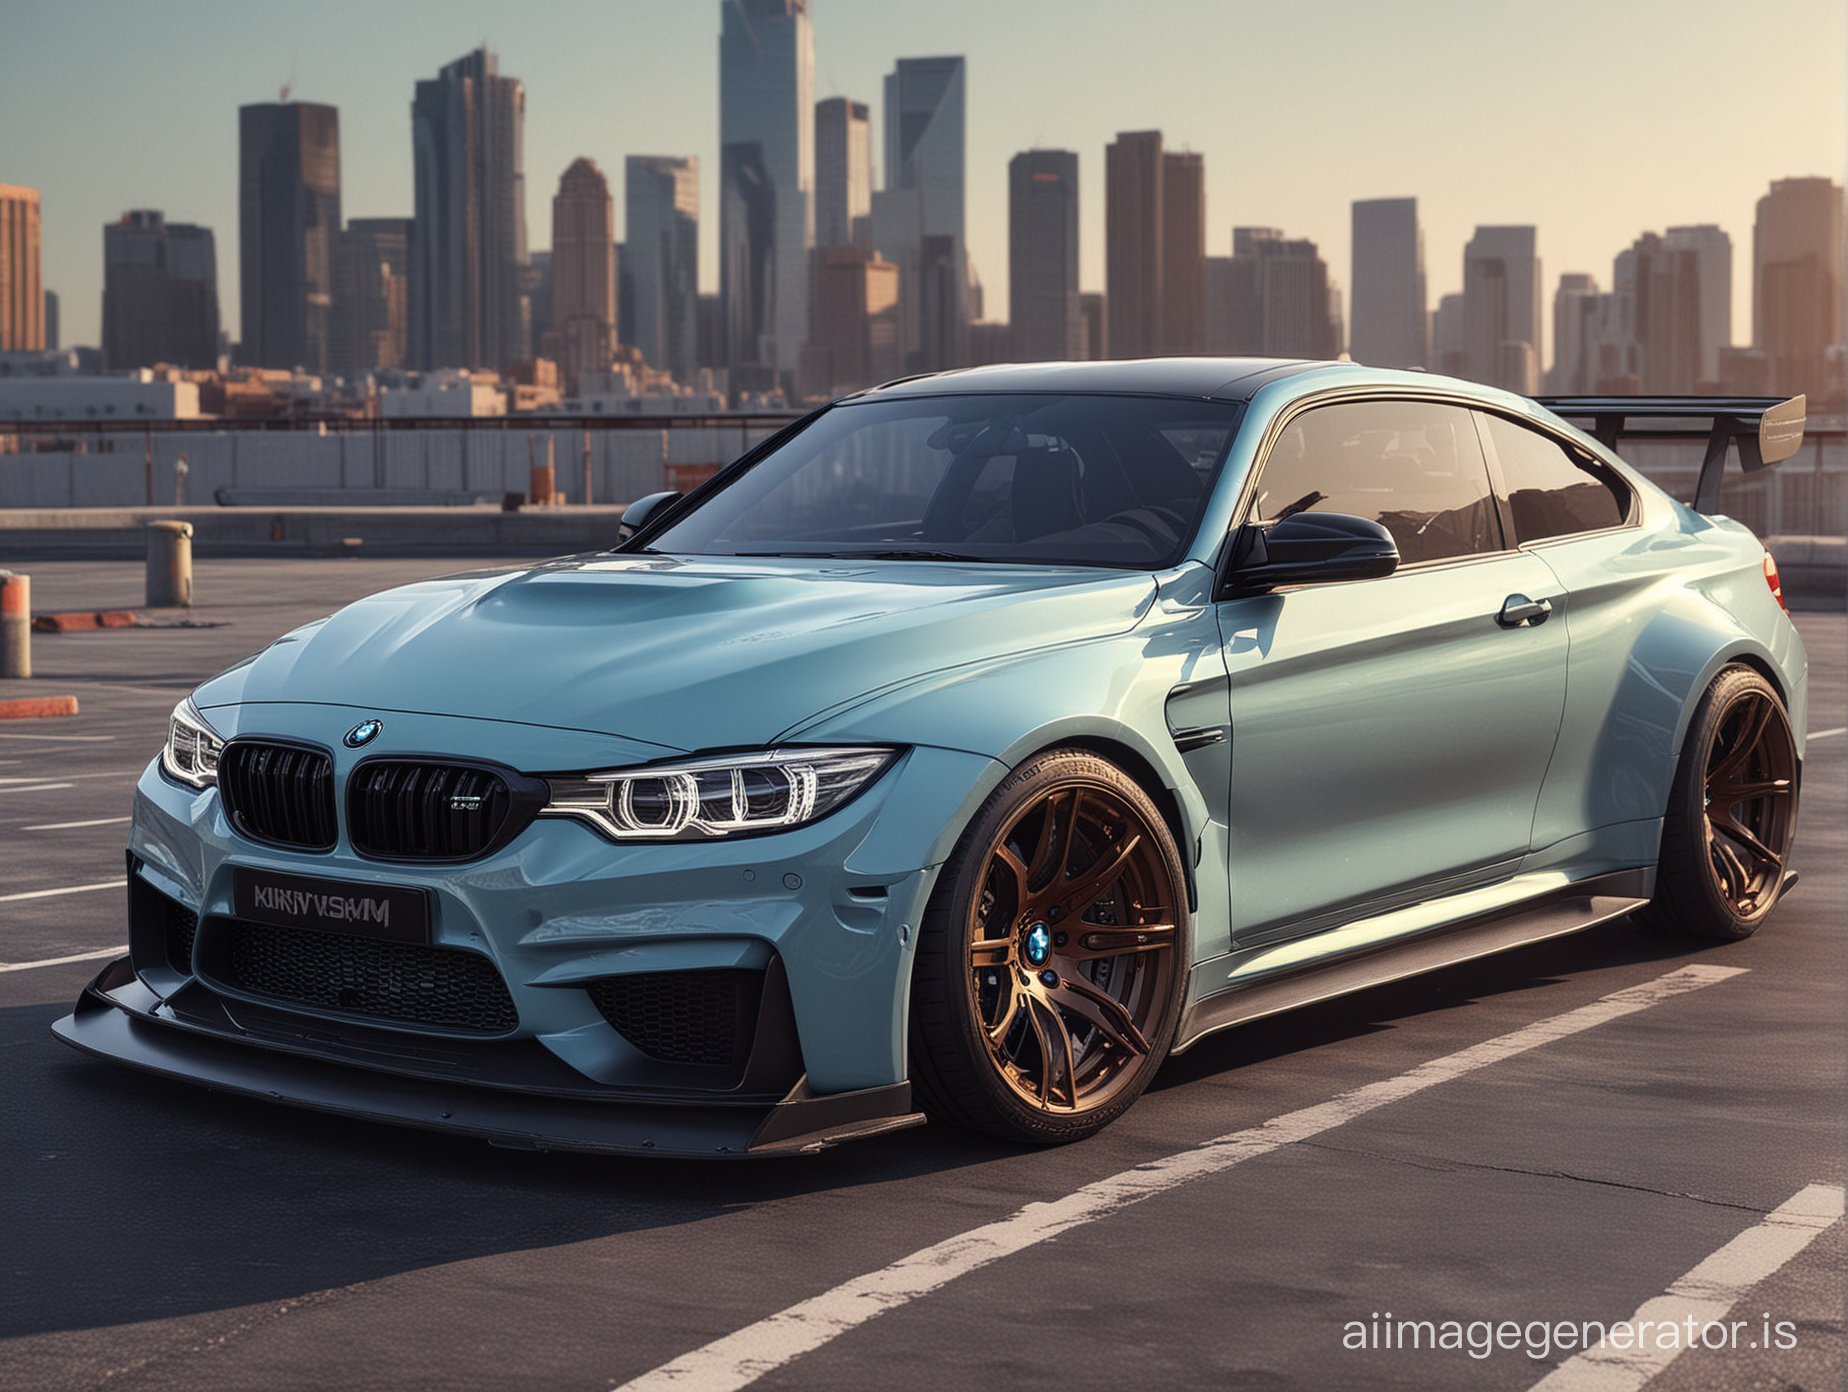 Khyzyl Saleem version of a BMW M4 with design cues taken from the front of a BMW E30 M3. Rooftop of a modern city